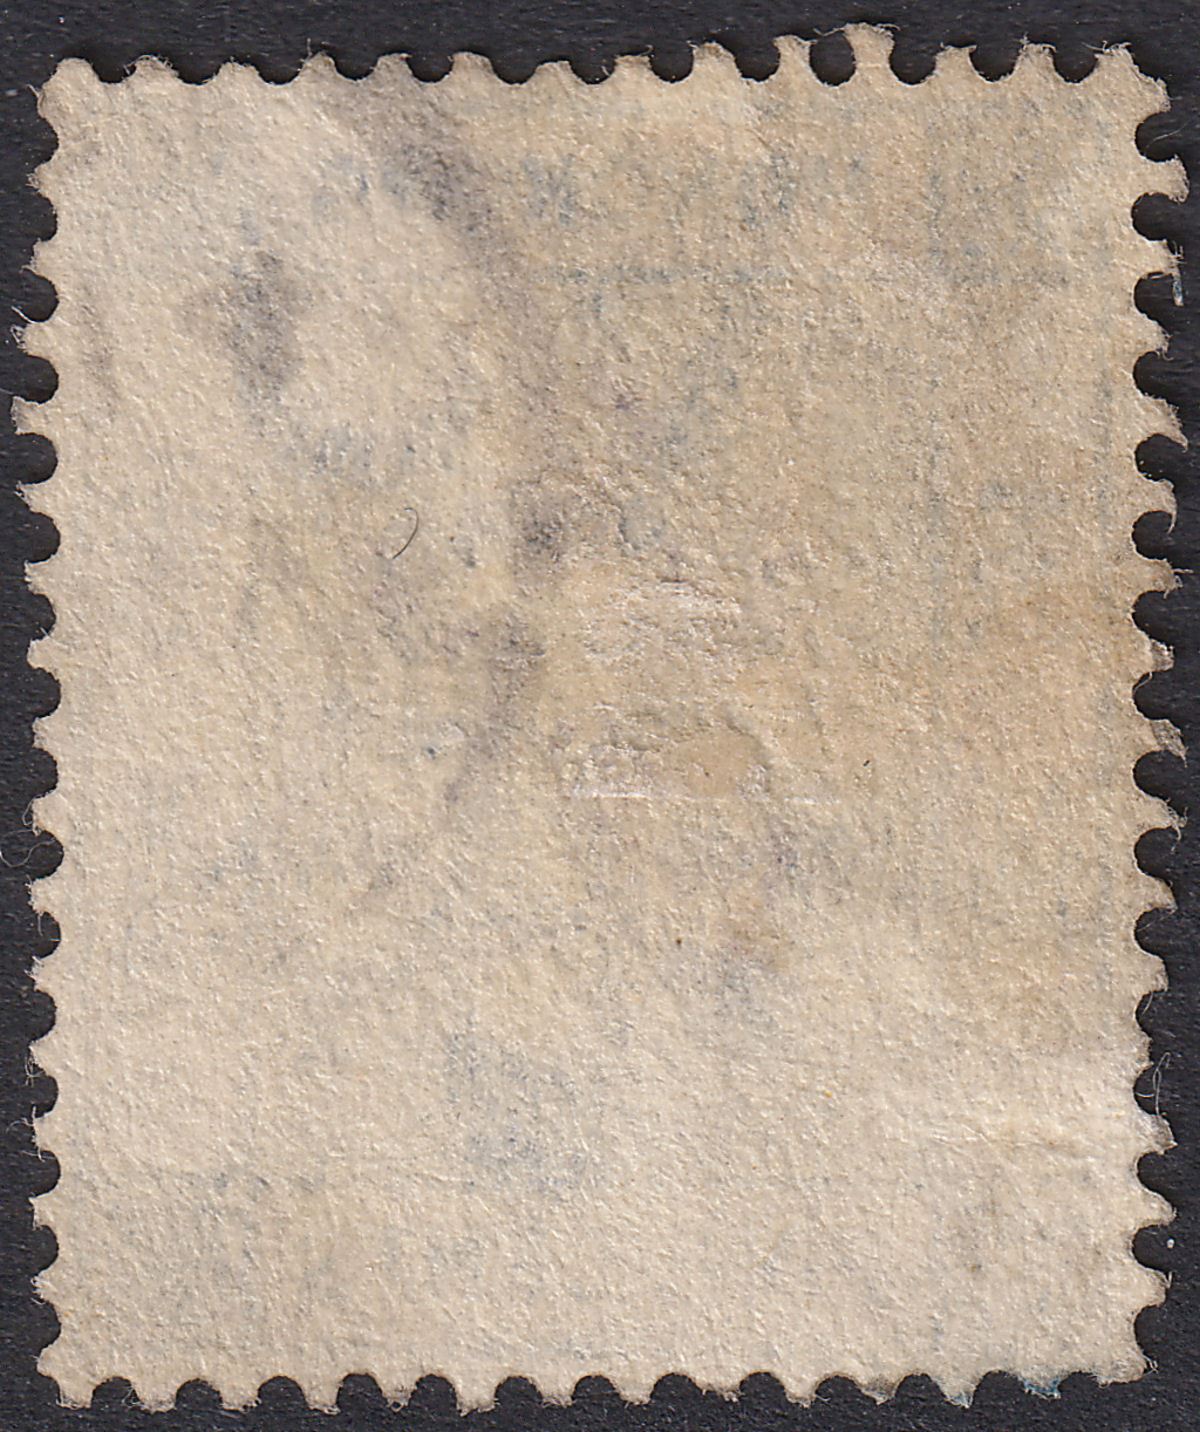 Hong Kong 1887 QV 5c wmk Inverted Used R&Co Chop AMOY postmark SG35aw cat £120